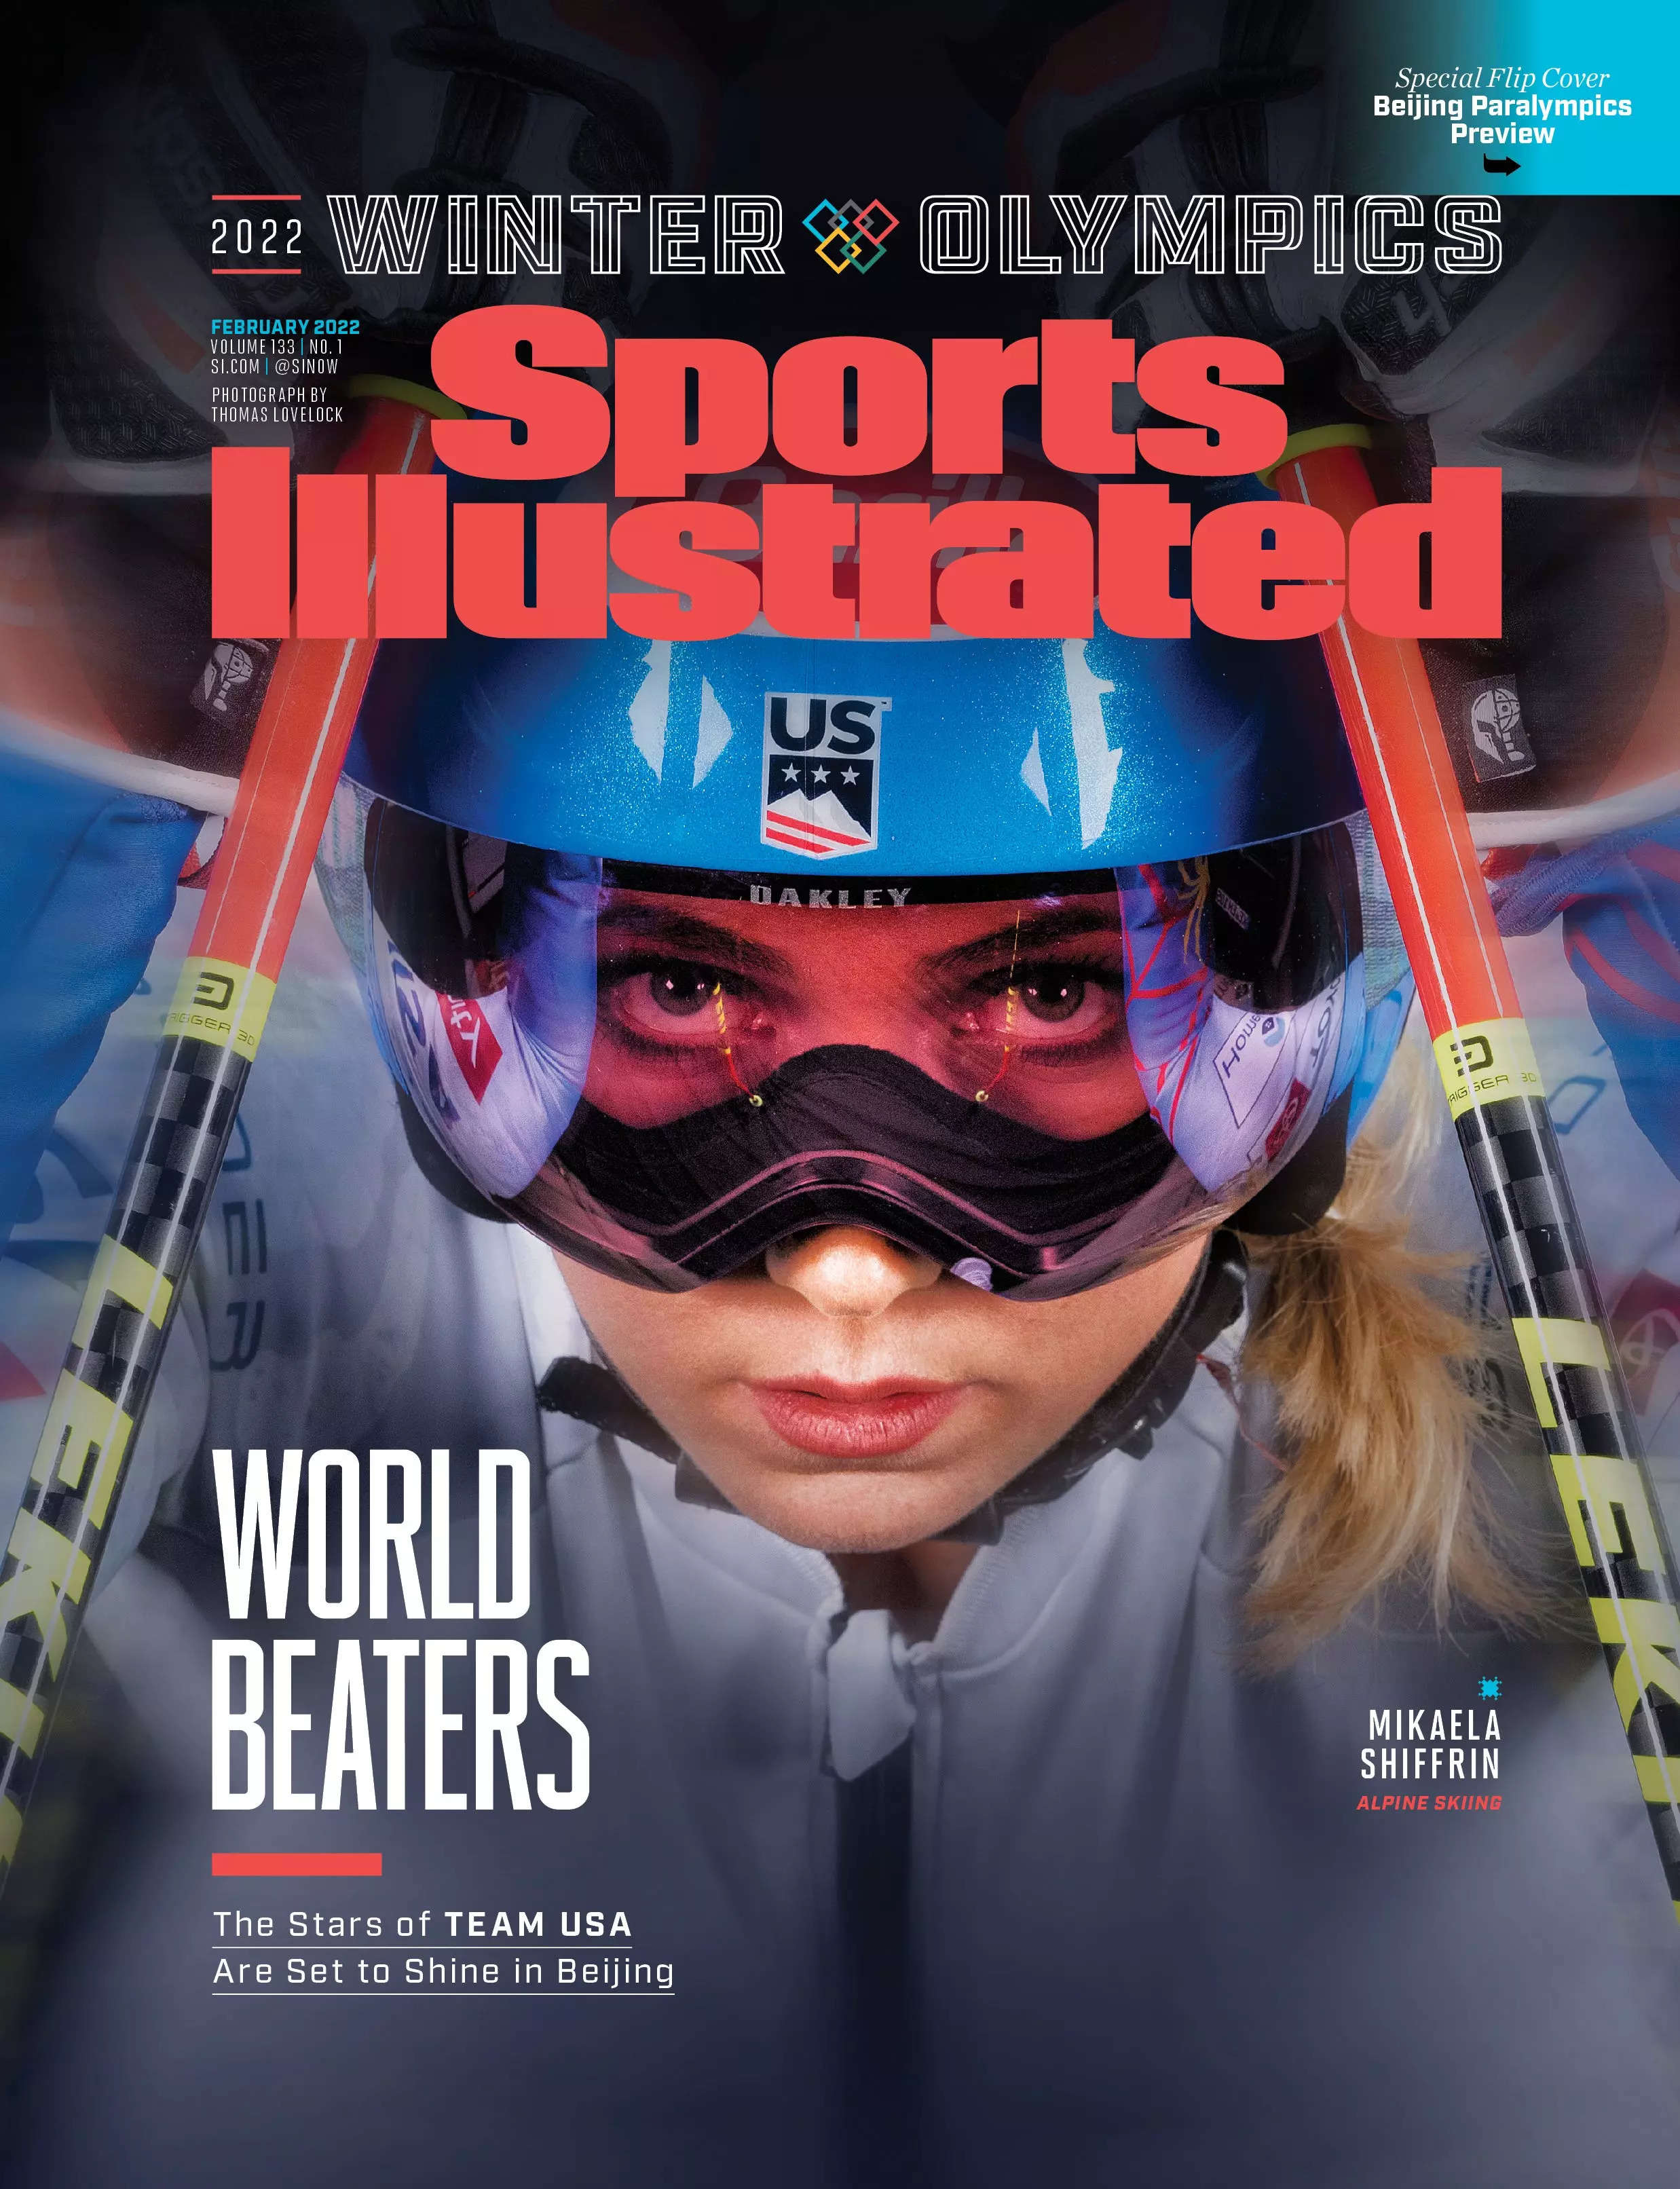 Mikaela Shiffrin is one of four cover athletes for Sports Illustrated